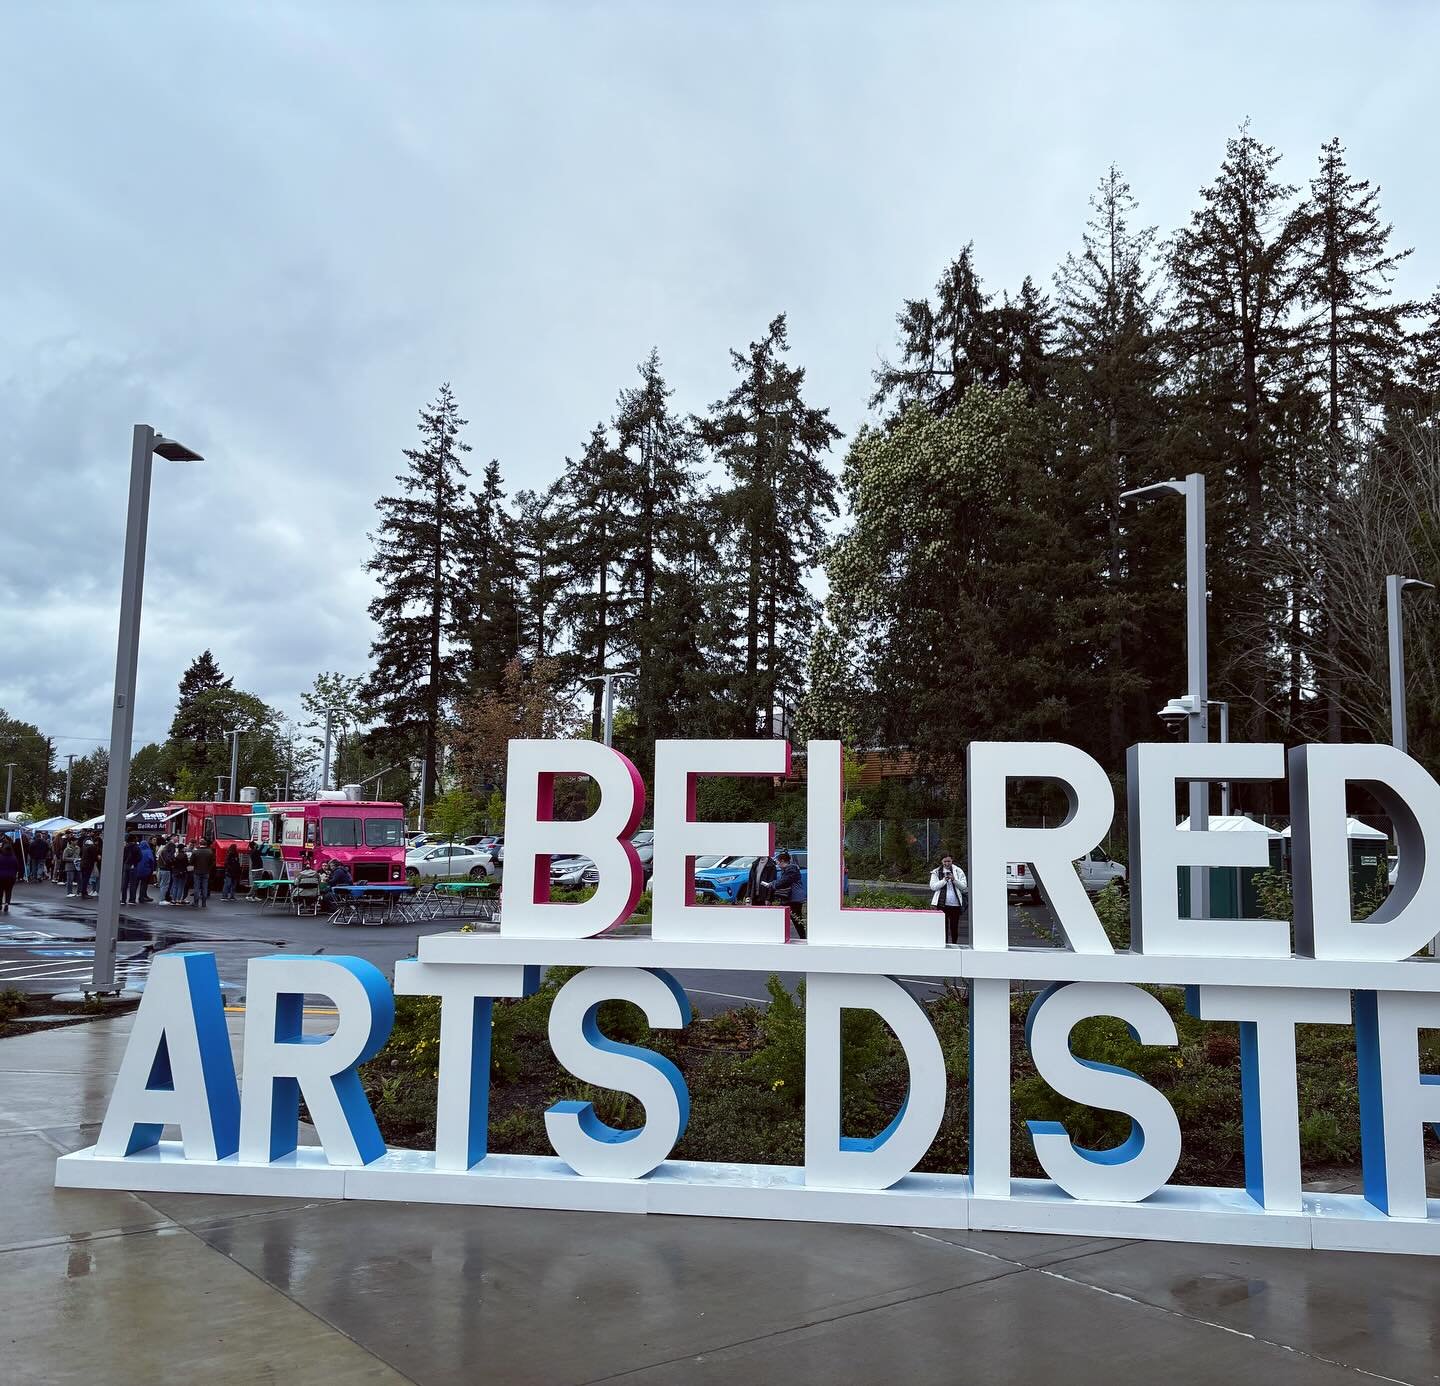 What a great event today at the BelRed Arts District! The brand new 2 Line train kept bringing in the crowds, who all braved the rain to come enjoy food, drinks, performances, music, and live art. The Canela team never stopped, though we had to pause